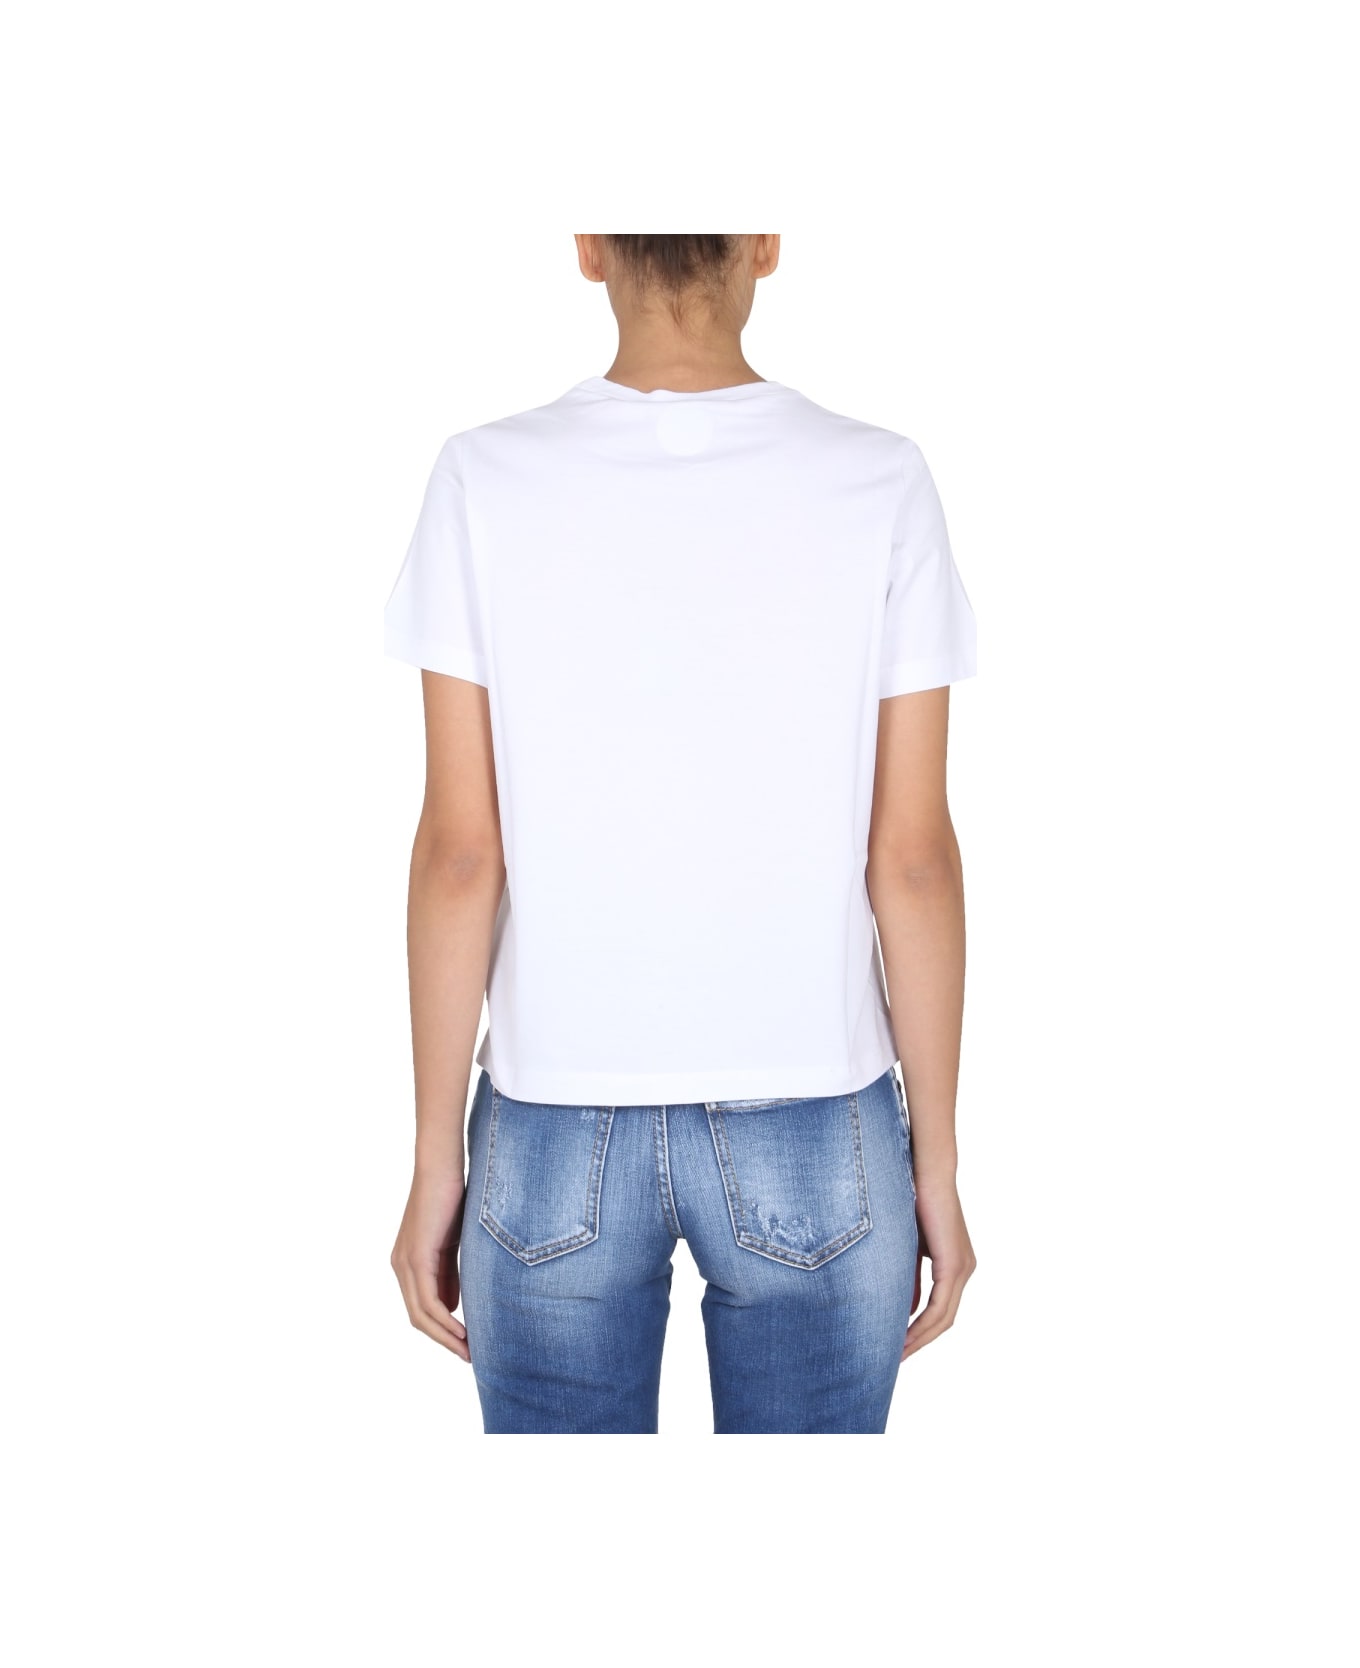 Dsquared2 "d2 Love Toy" T-shirt - WHITE